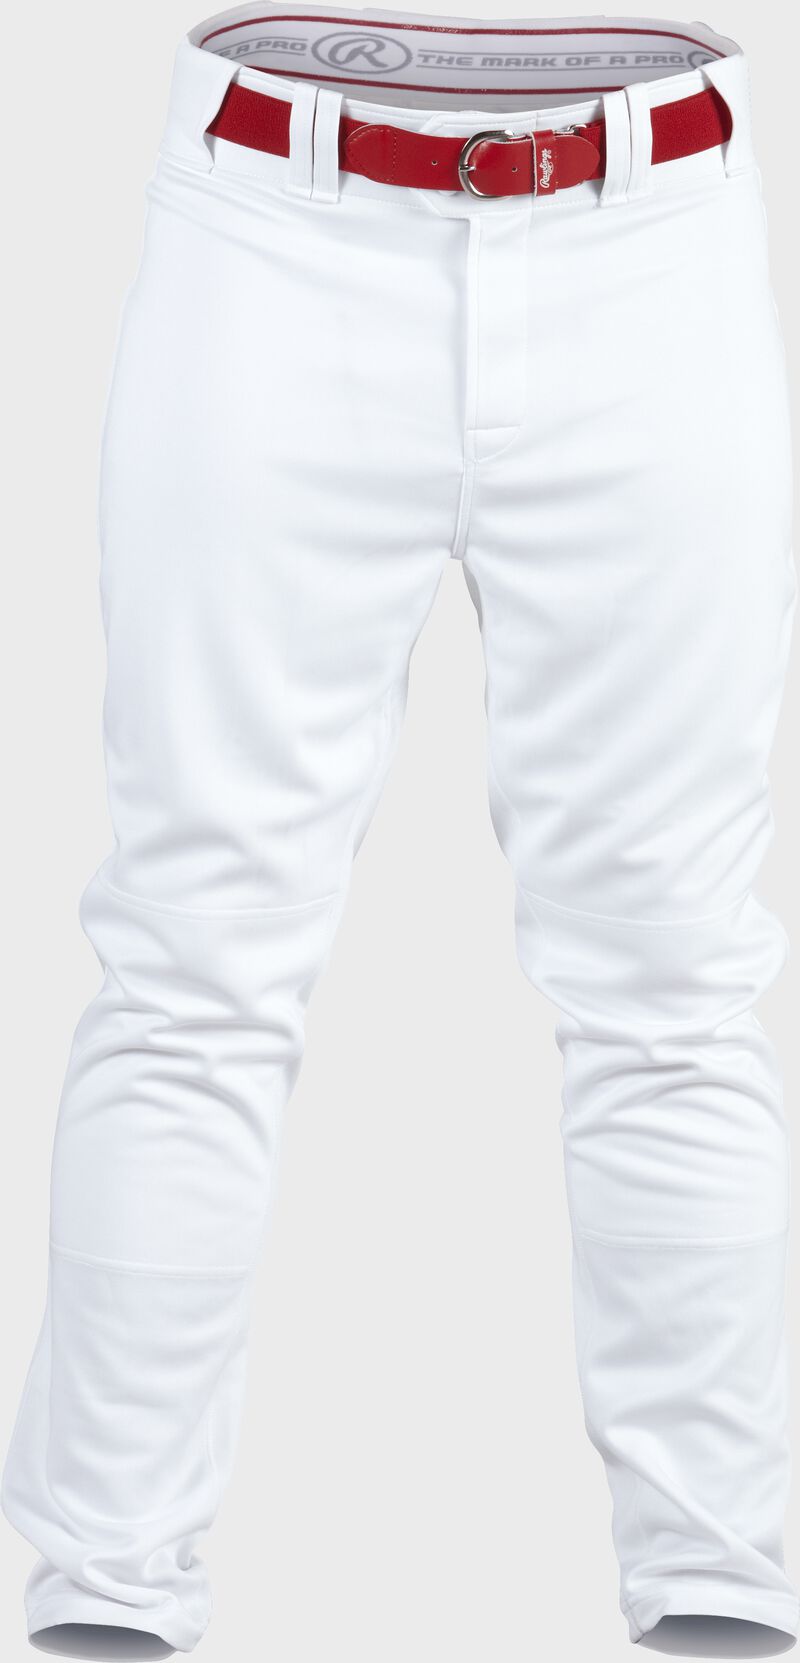 Front of Rawlings White Adult Semi-Relaxed Pant - SKU #PRO150 loading=